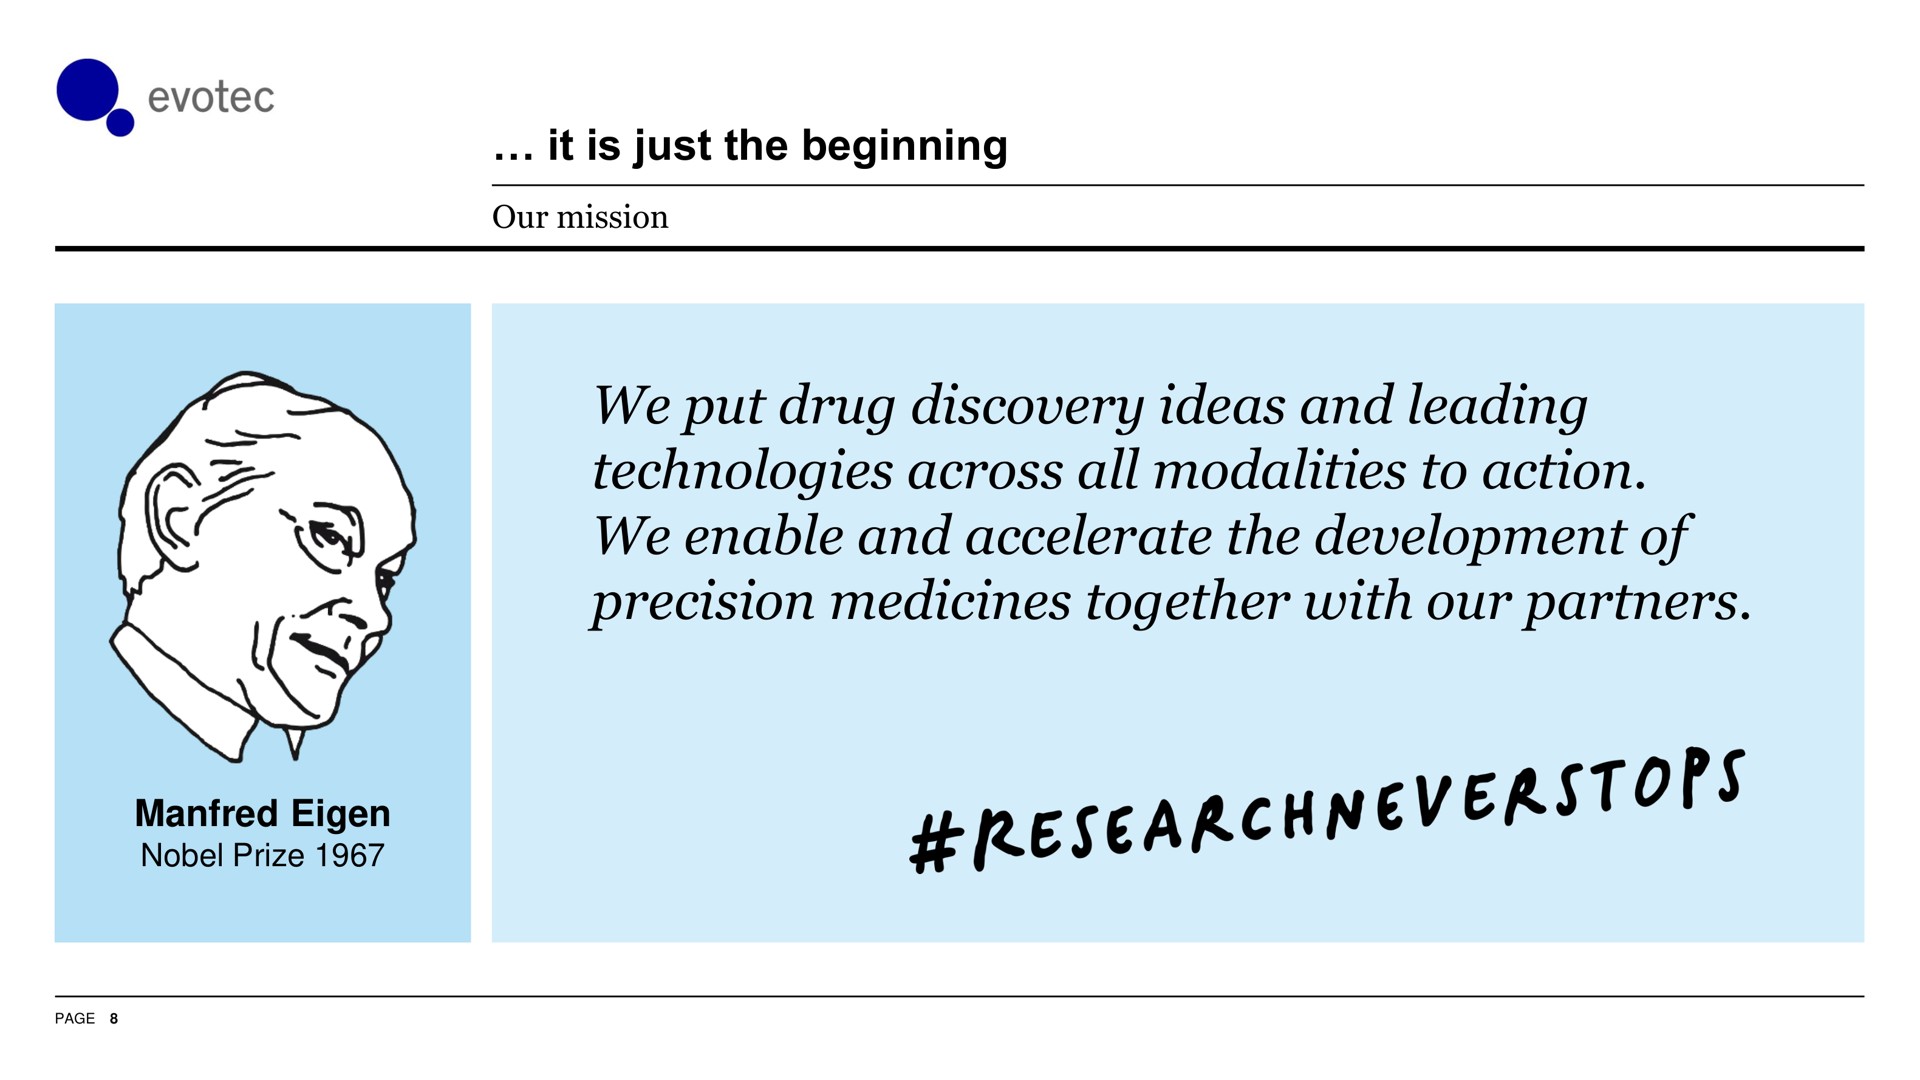 it is just the beginning we put drug discovery ideas and leading technologies across all modalities to action we enable and accelerate the development of precision medicines together with our partners | Evotec